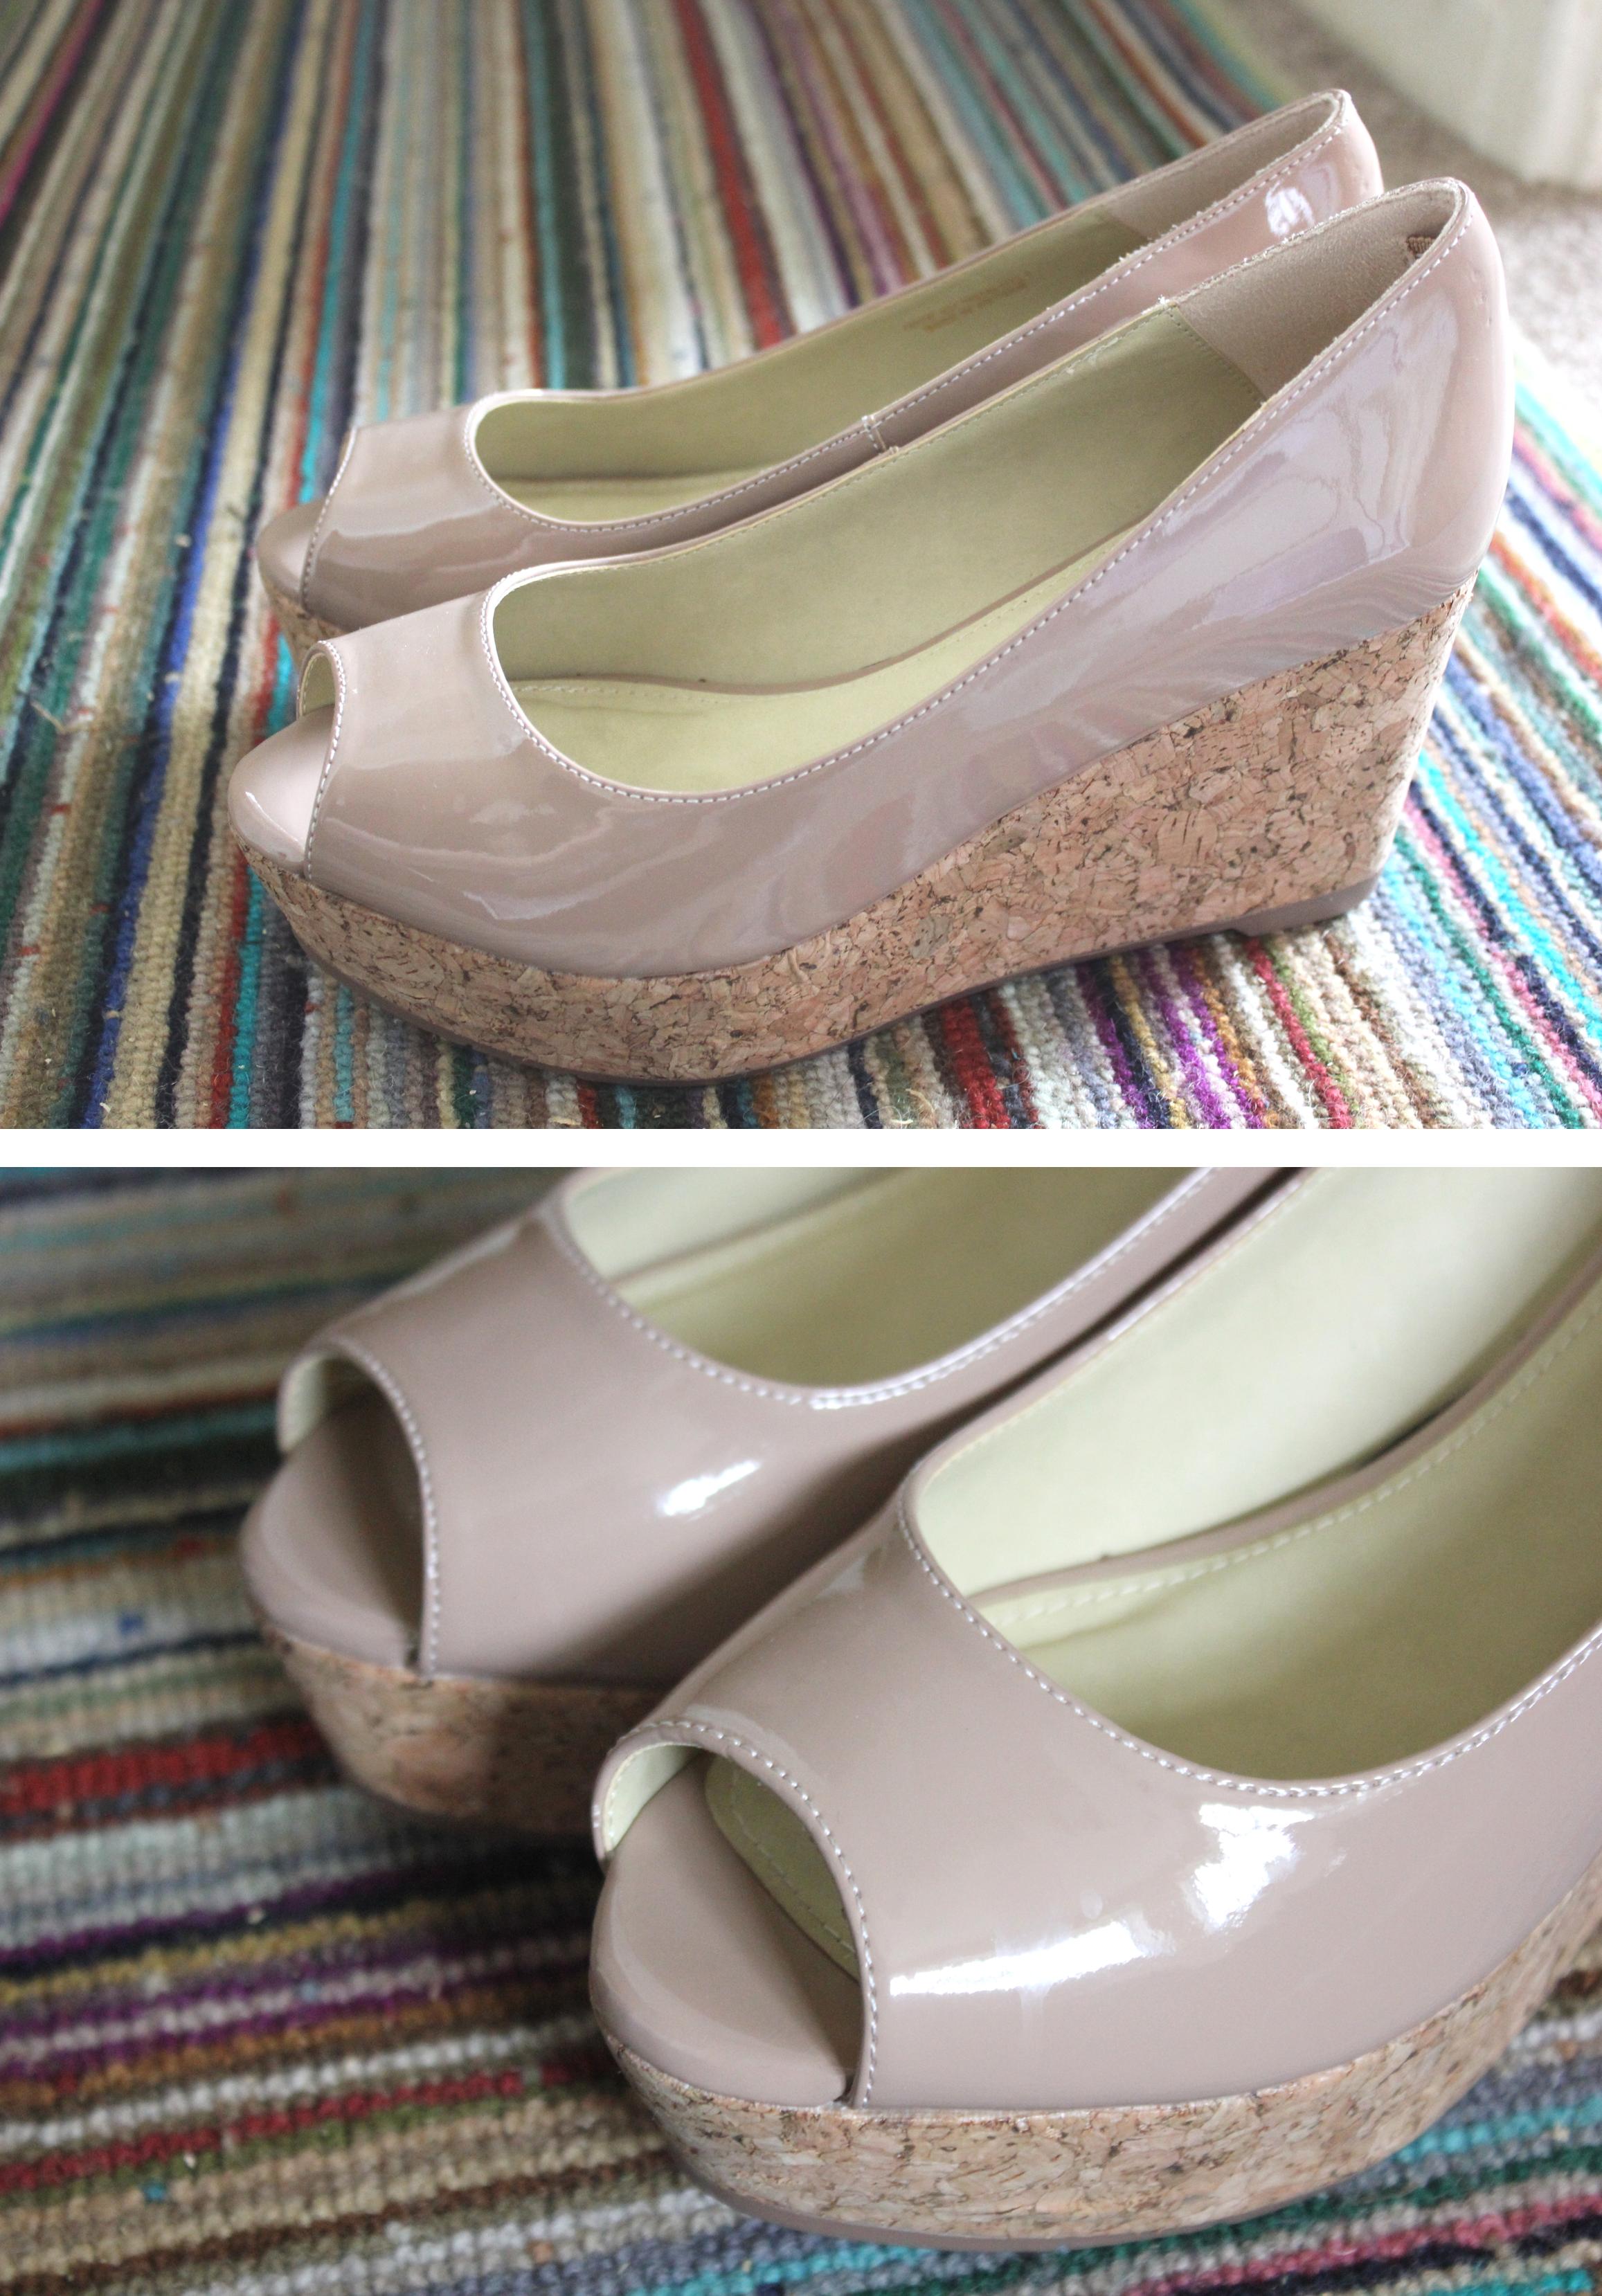 tuesday shoesday nude peep toe wedge heel summer shoes 2013 from next